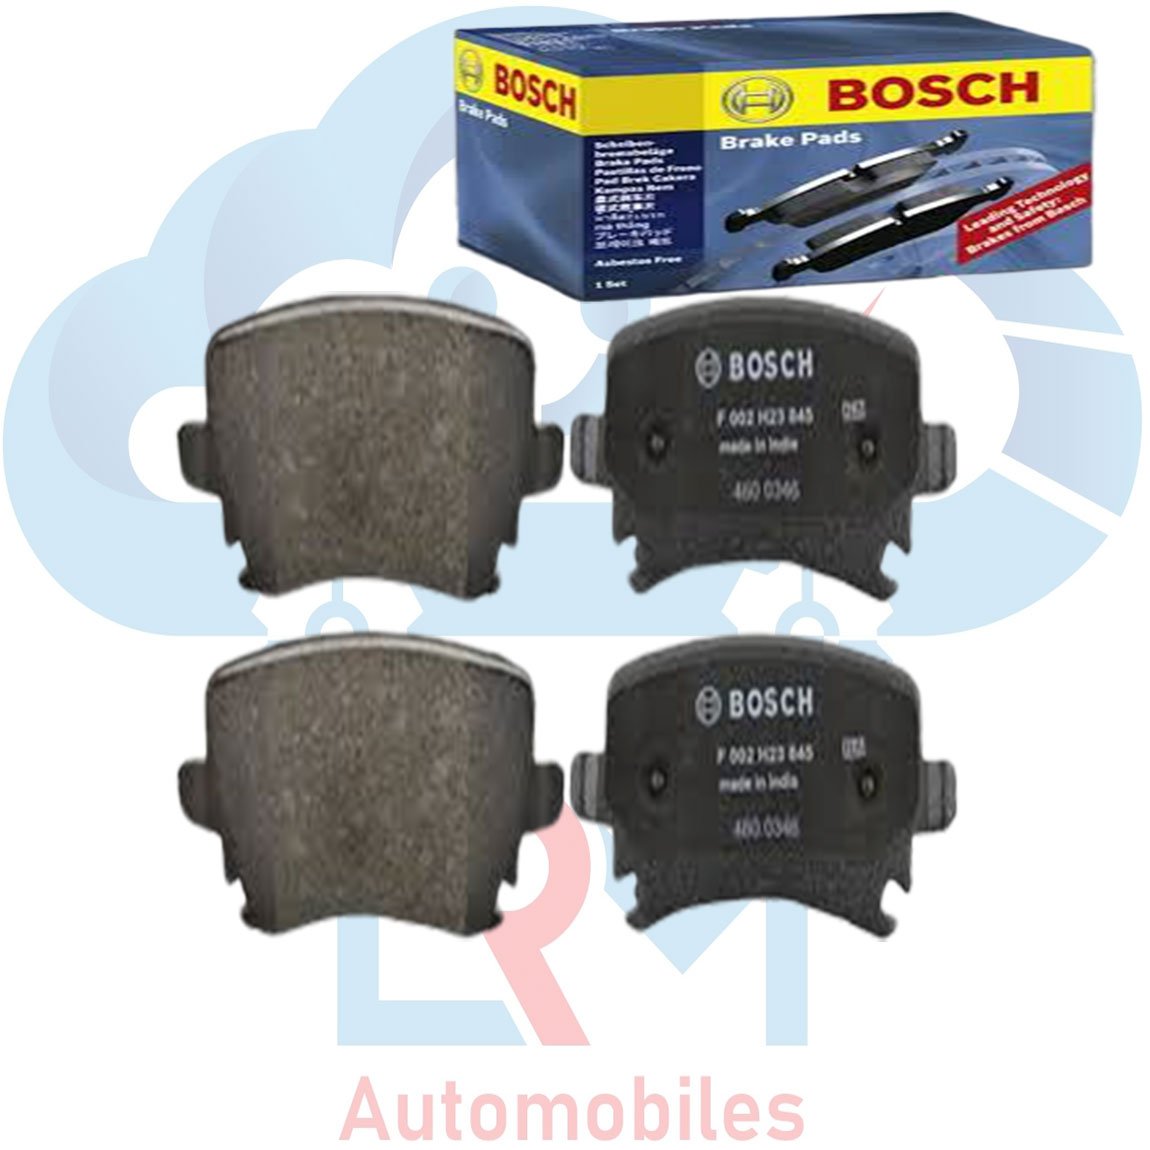 Laura Front Brake pad F002H23612 8F8 in Bosch